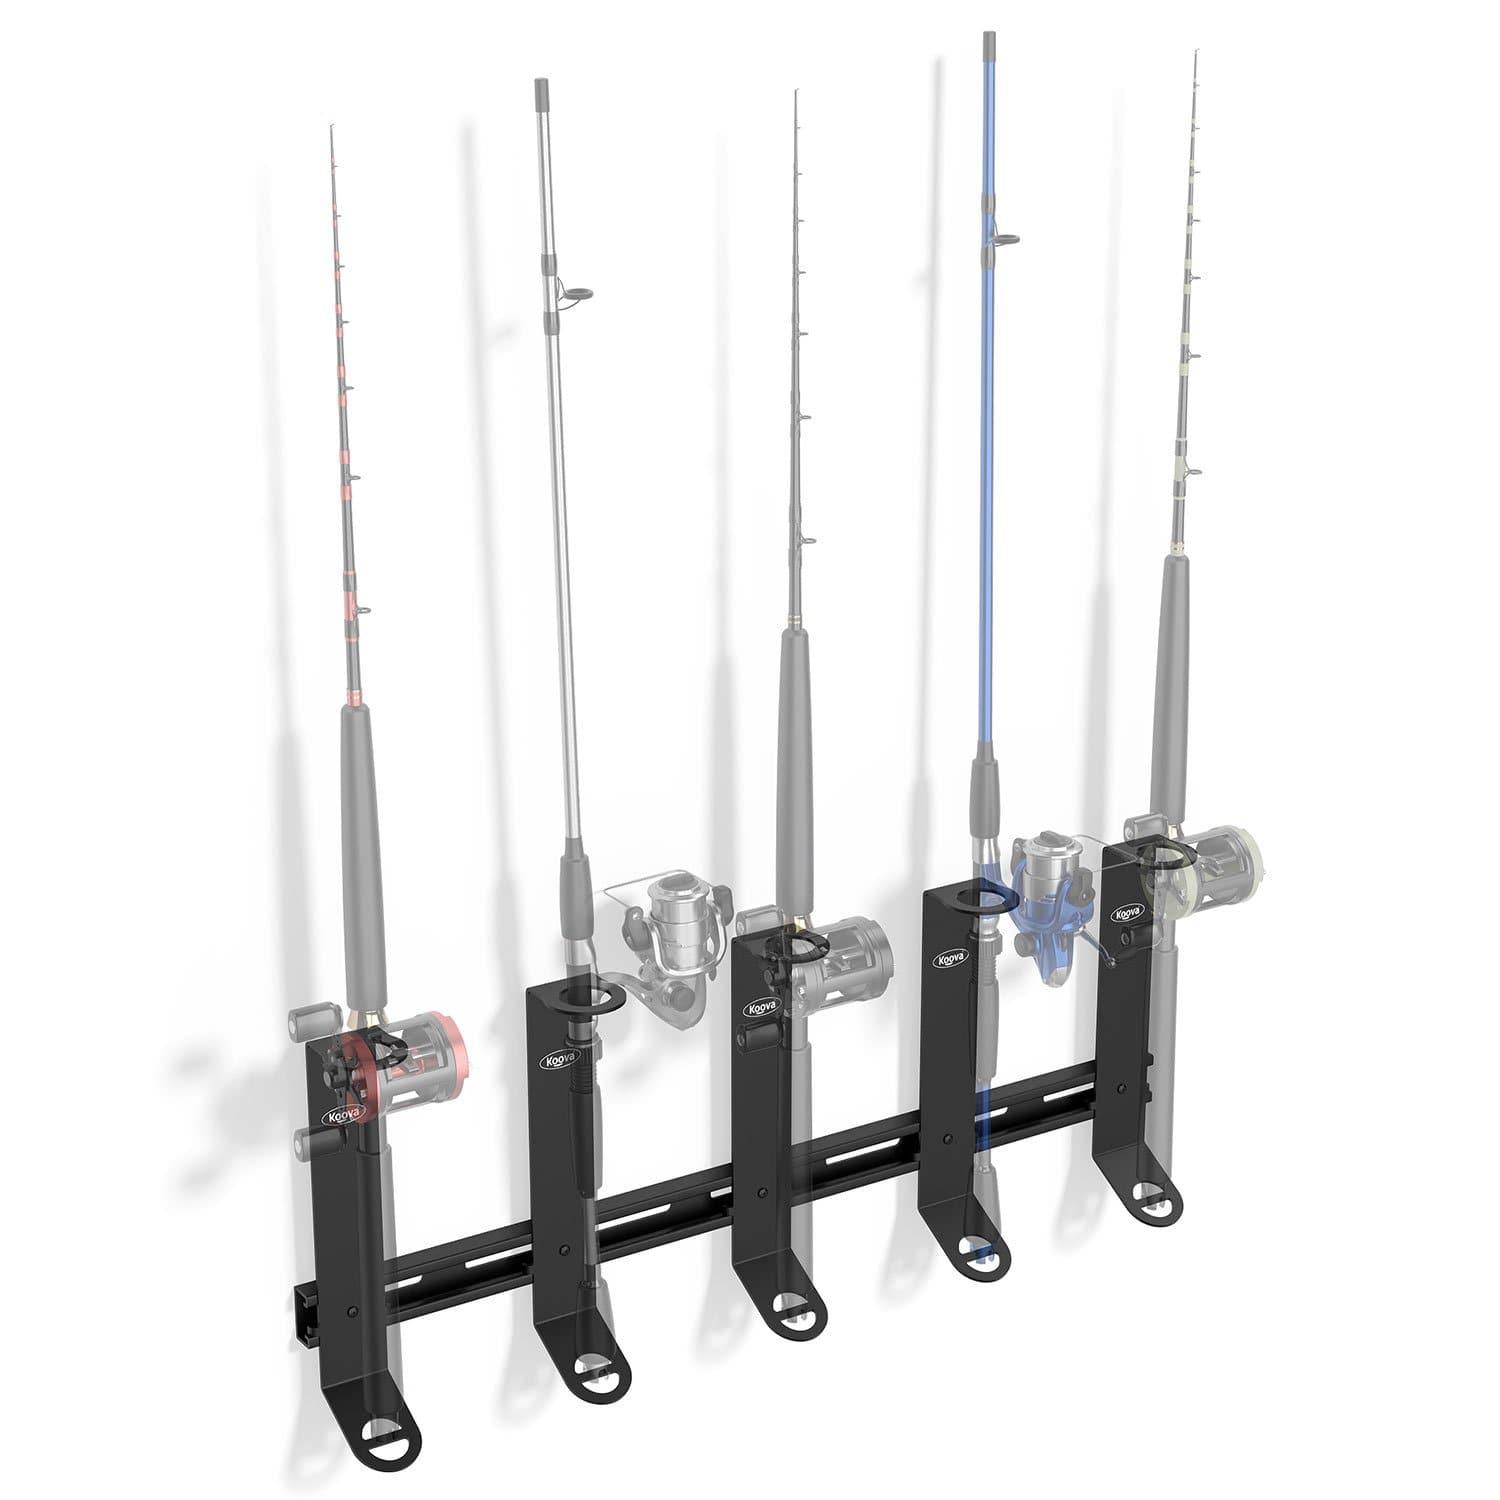 Wall-mounted fishing rod holder with LED light